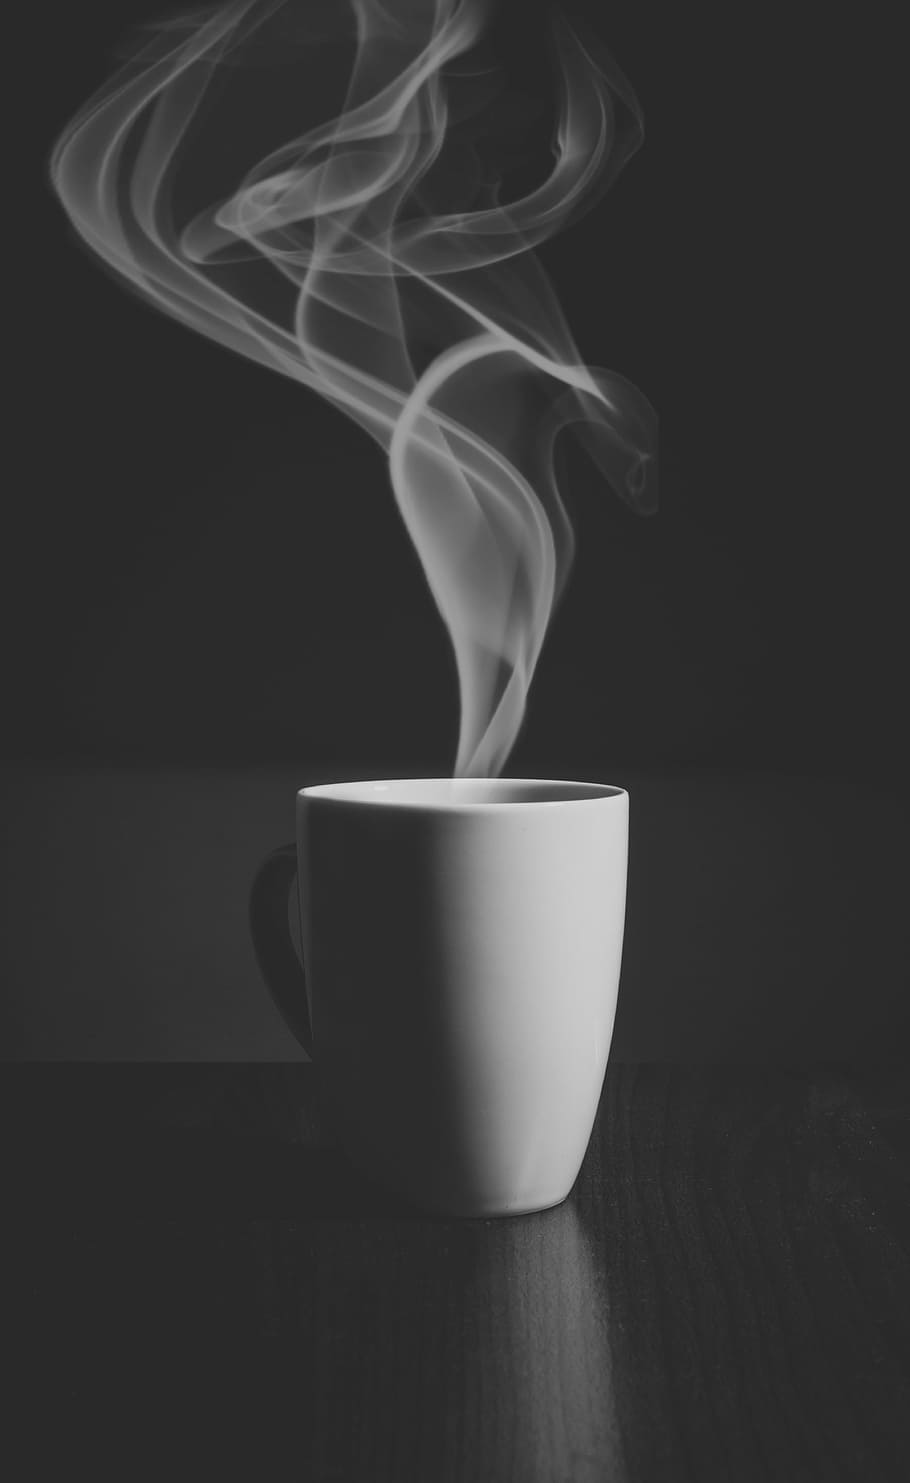 steam going out from mug grayscale photo, coffee, mocha, espresso